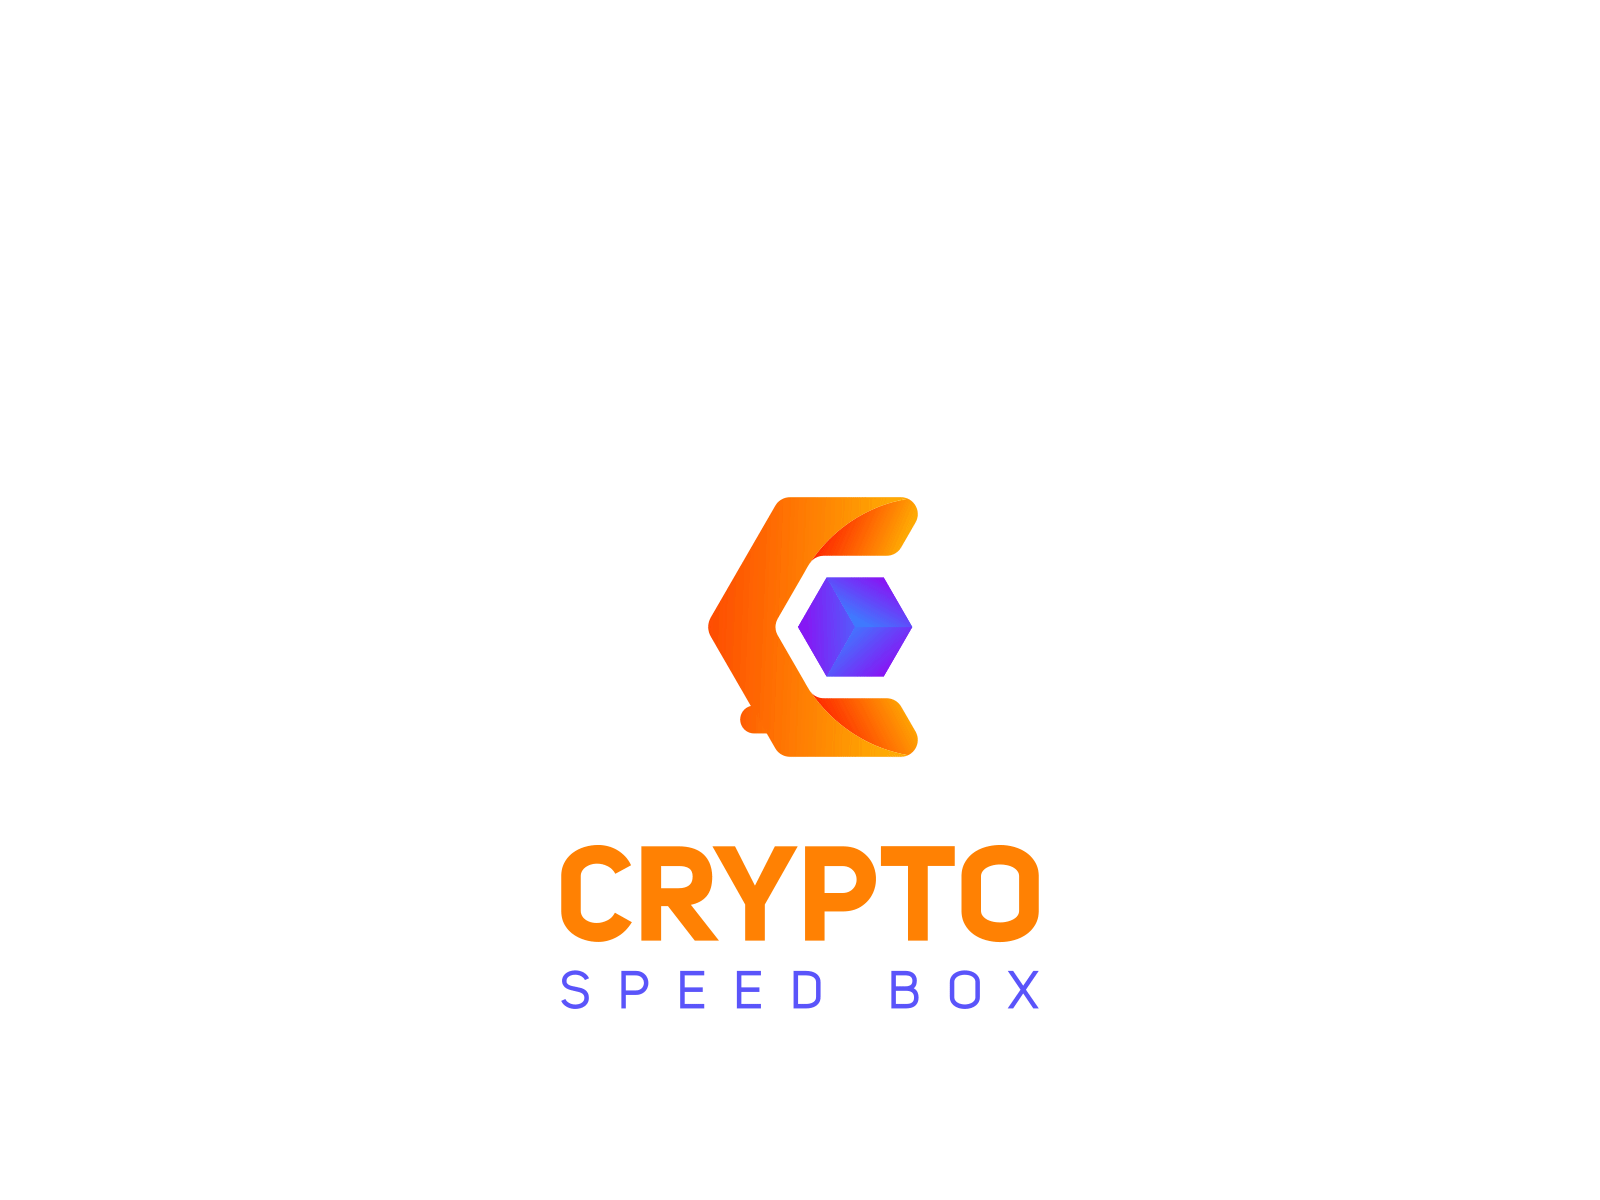 Crypto speed box animation animation animation after effects design instagram post logo motion design